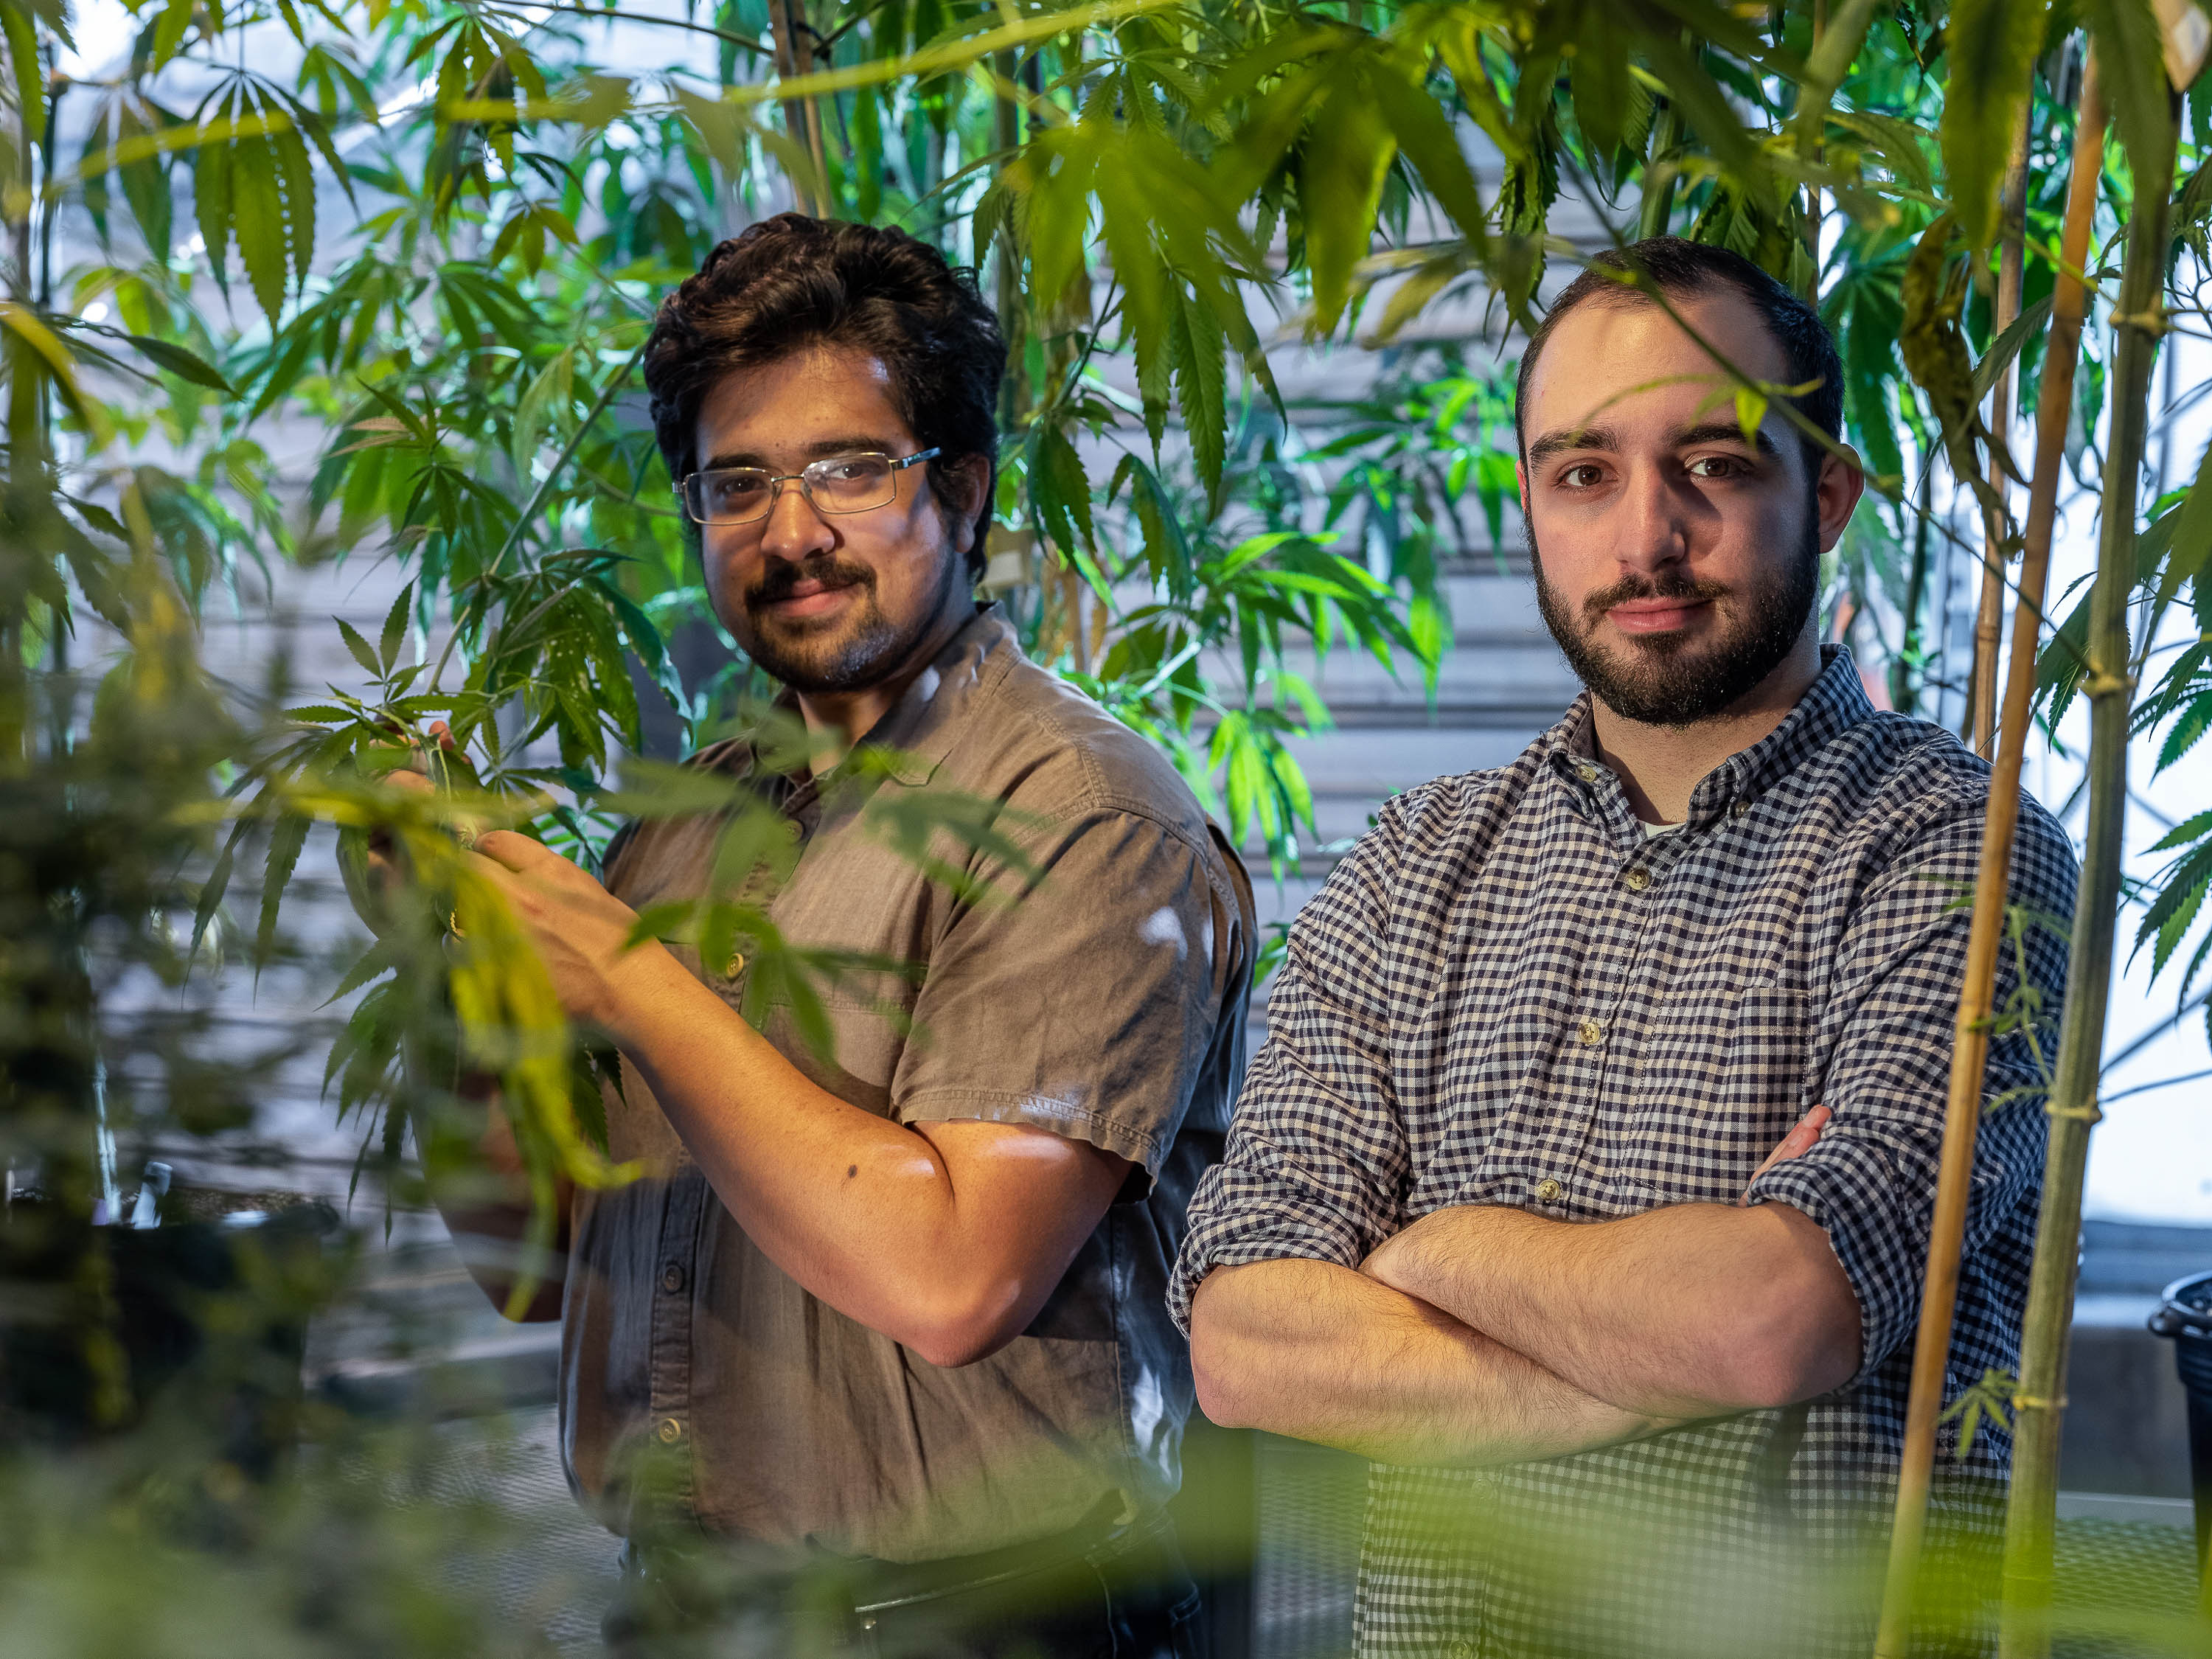 Jacob Toth and George Stack are both PhD Students in Plant Breeding and Genetics at Cornell.